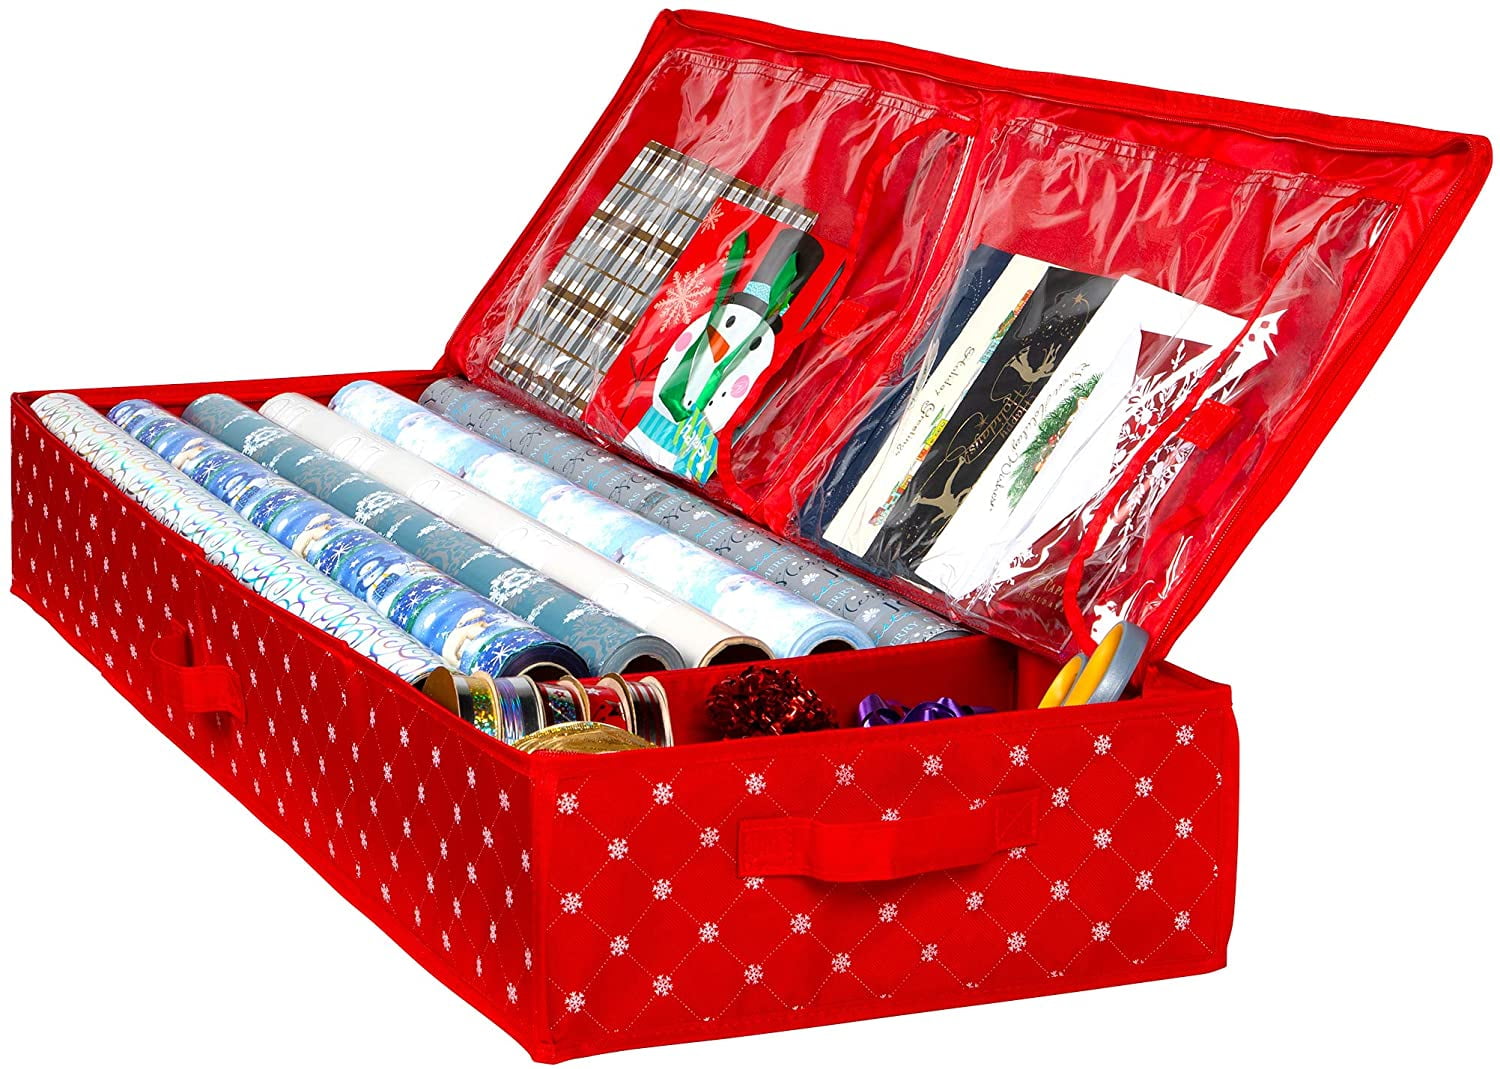 Christmas Storage Organizer - Wrapping Paper Storage and Under-Bed